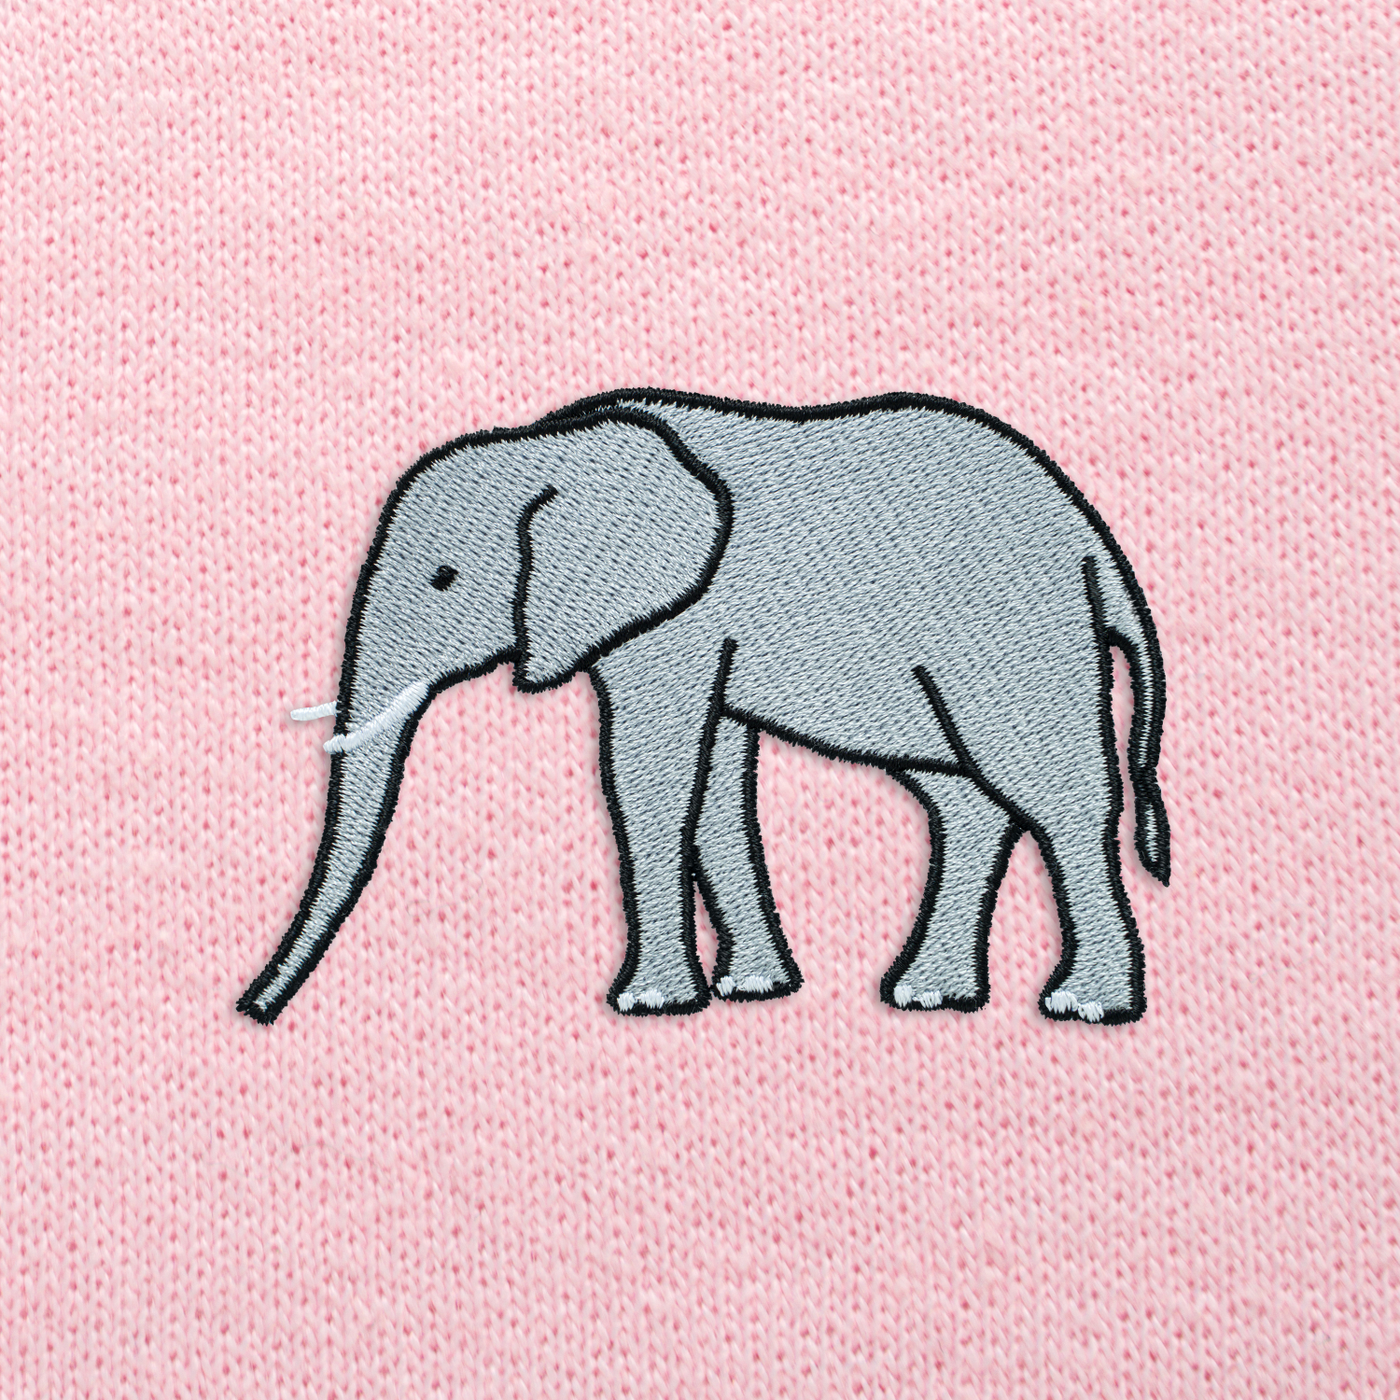 Bobby's Planet Women's Embroidered Elephant Sweatshirt from African Animals Collection in Light Pink Color#color_light-pink